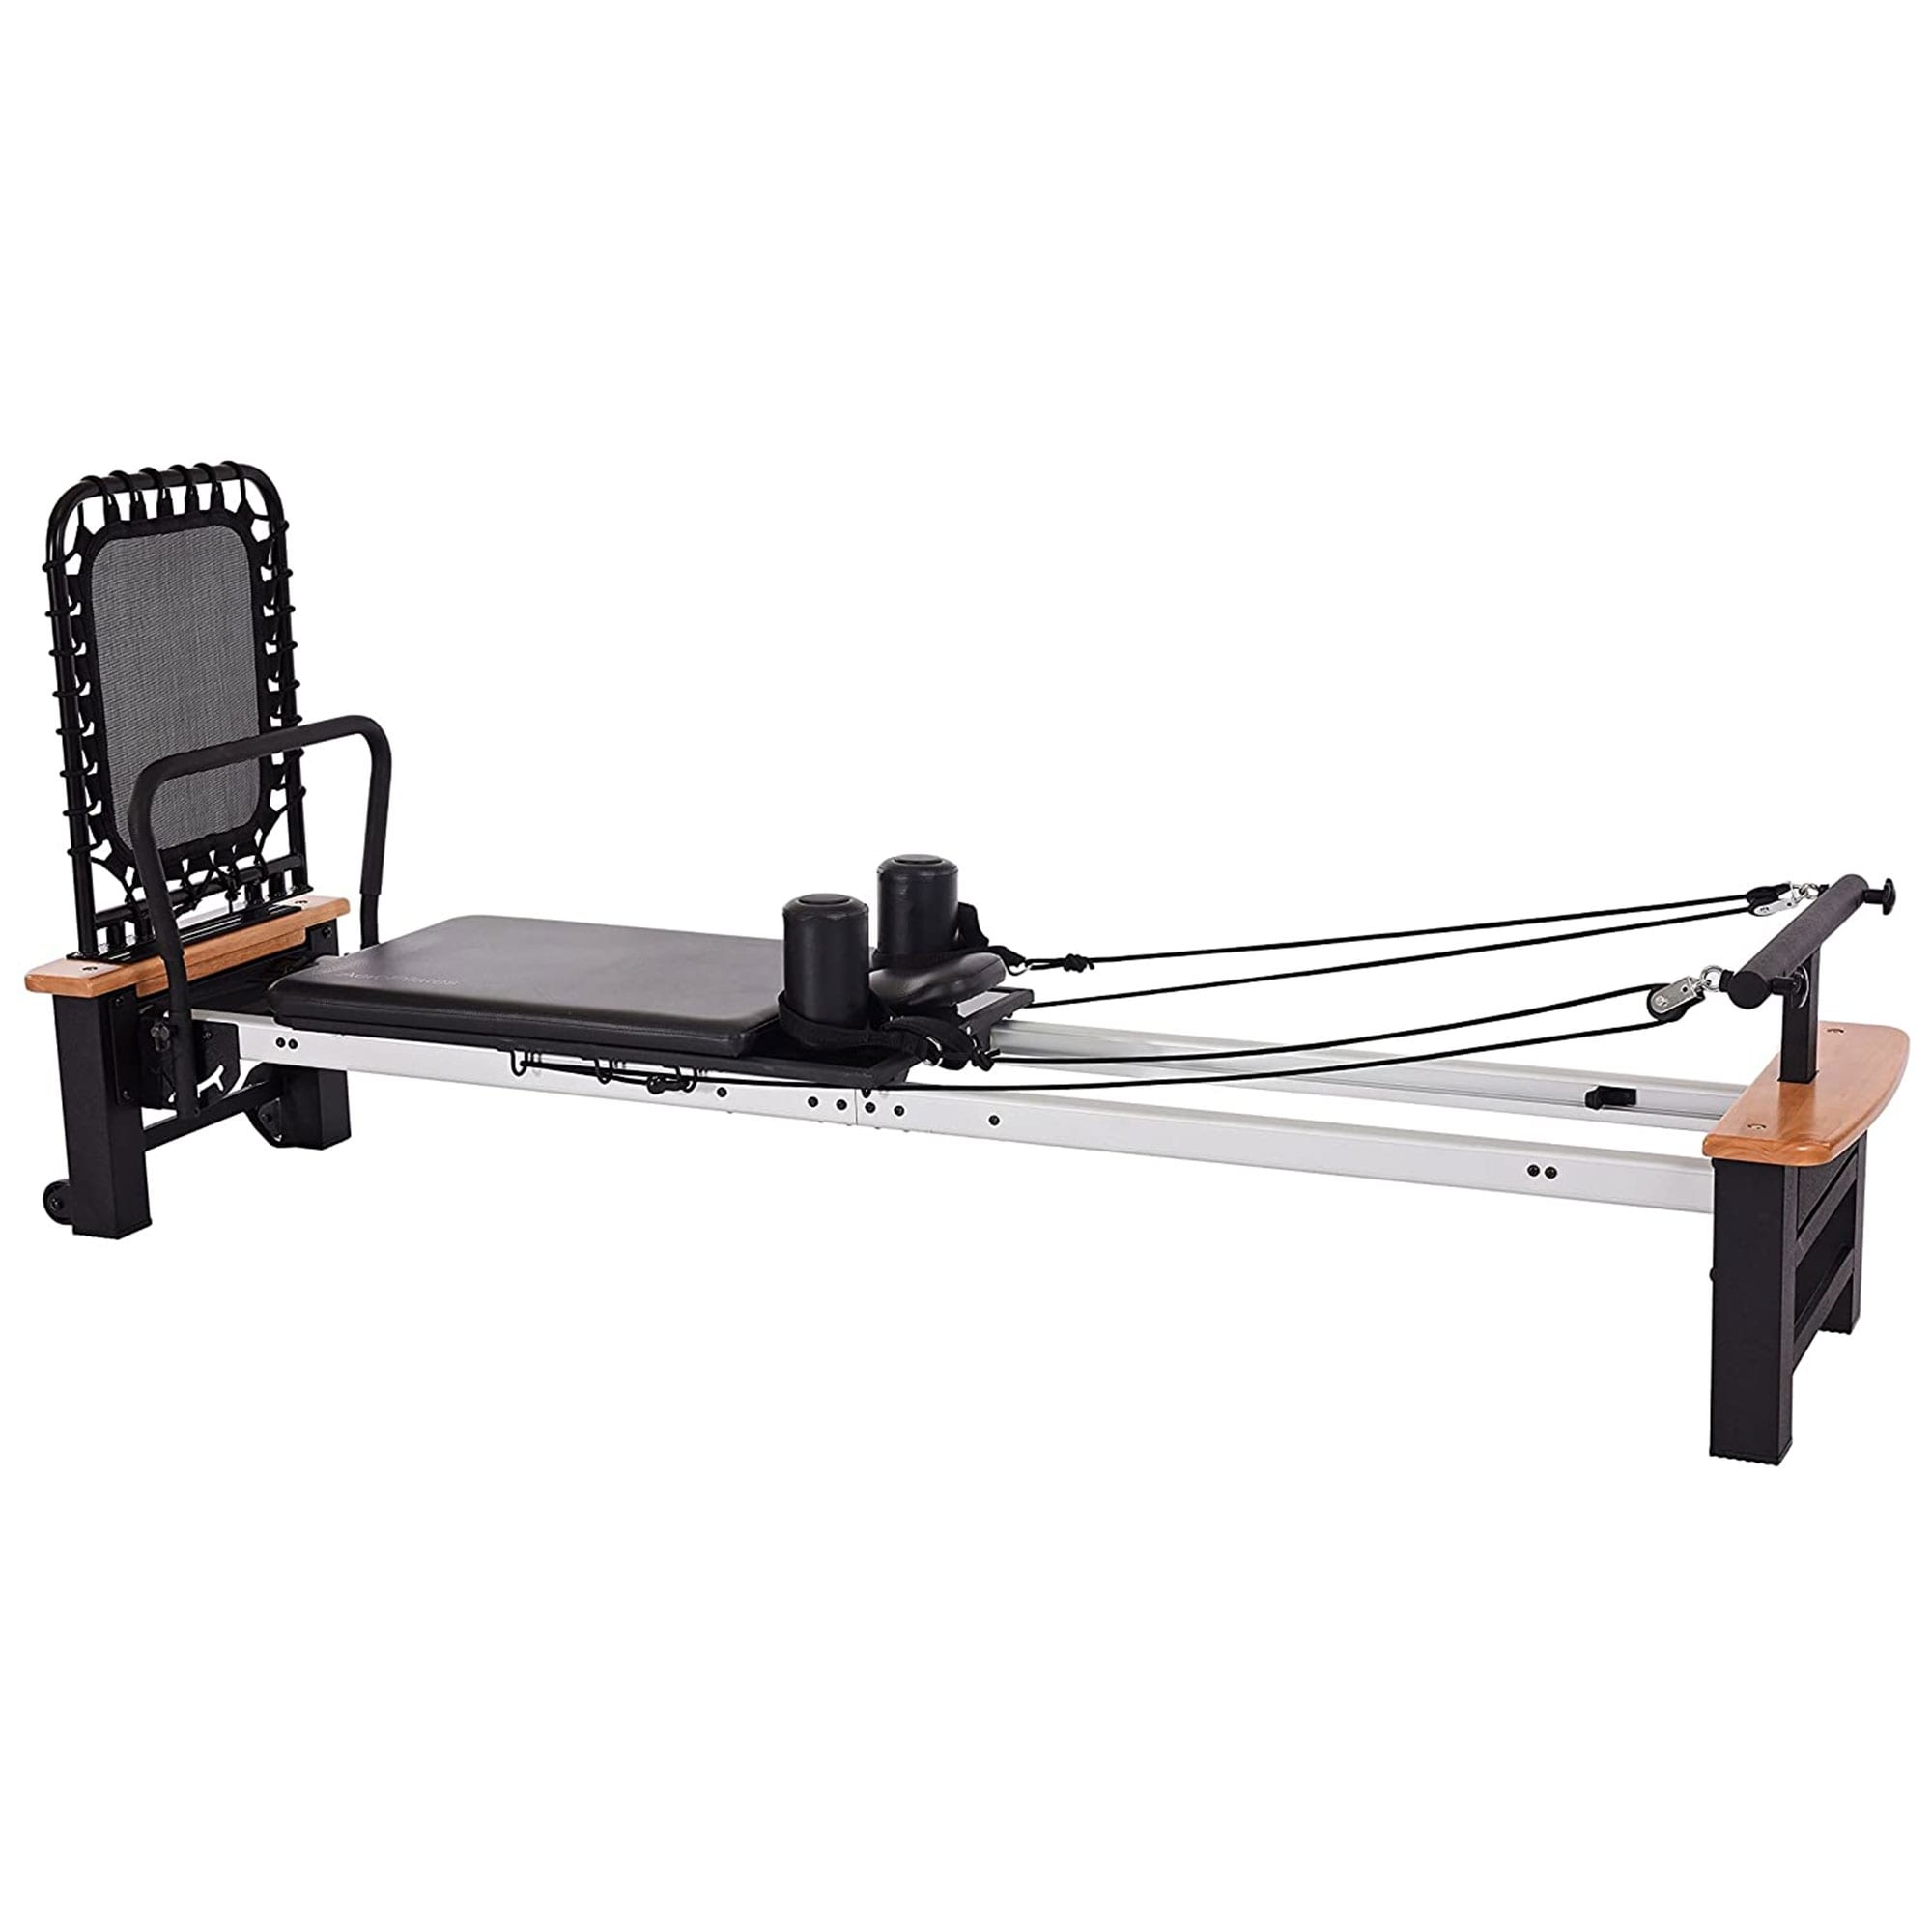 Stamina AeroPilates Pro Reformer Resistance System with Form Cardio  Rebounder - 94 x 23.5 x 15 inches